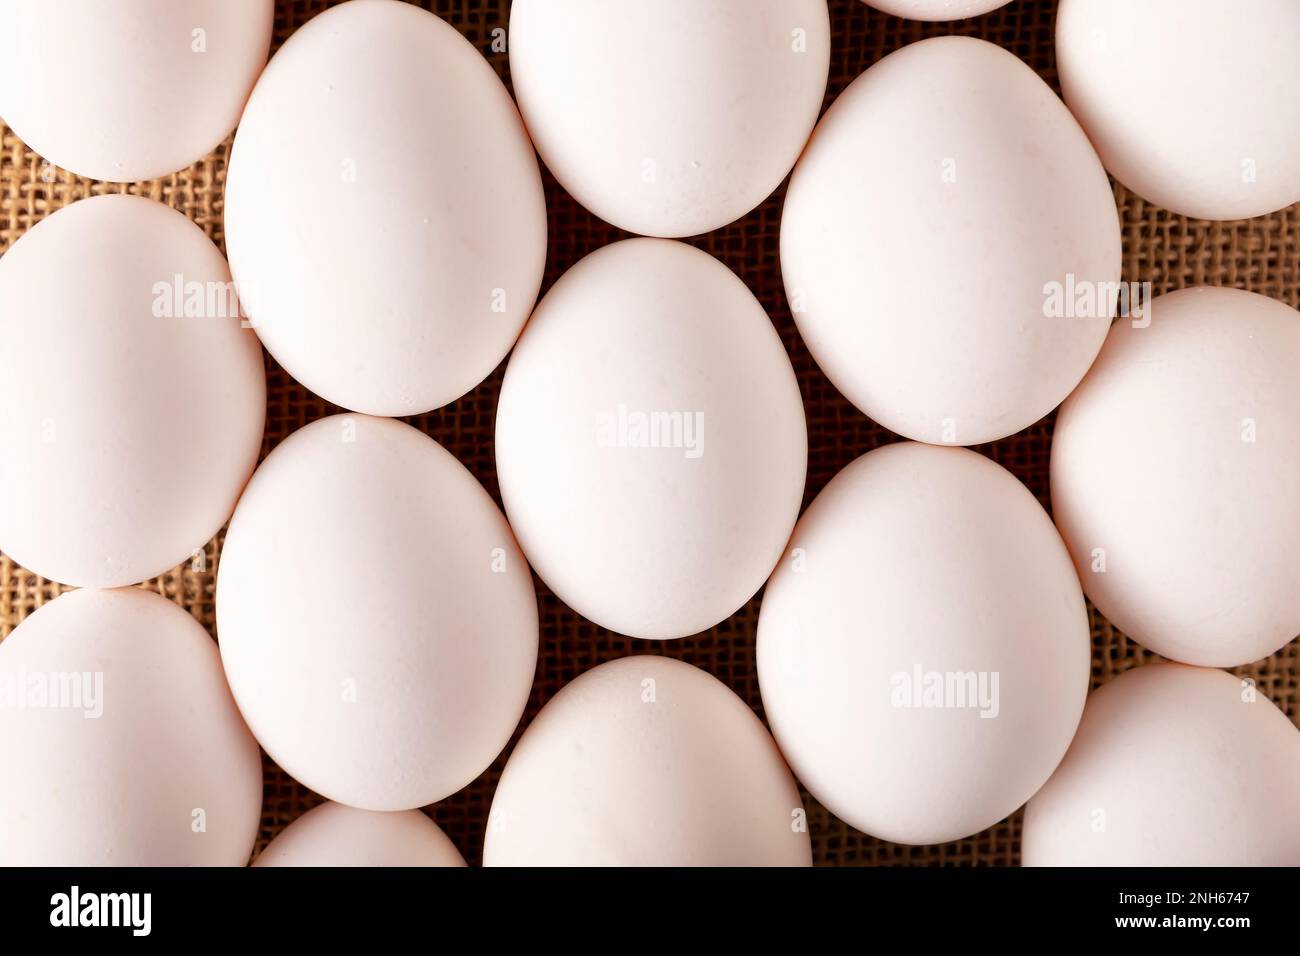 White chicken eggs arranged on burlap texture. Very popular nutritious and economic food product. Top table view. Stock Photo